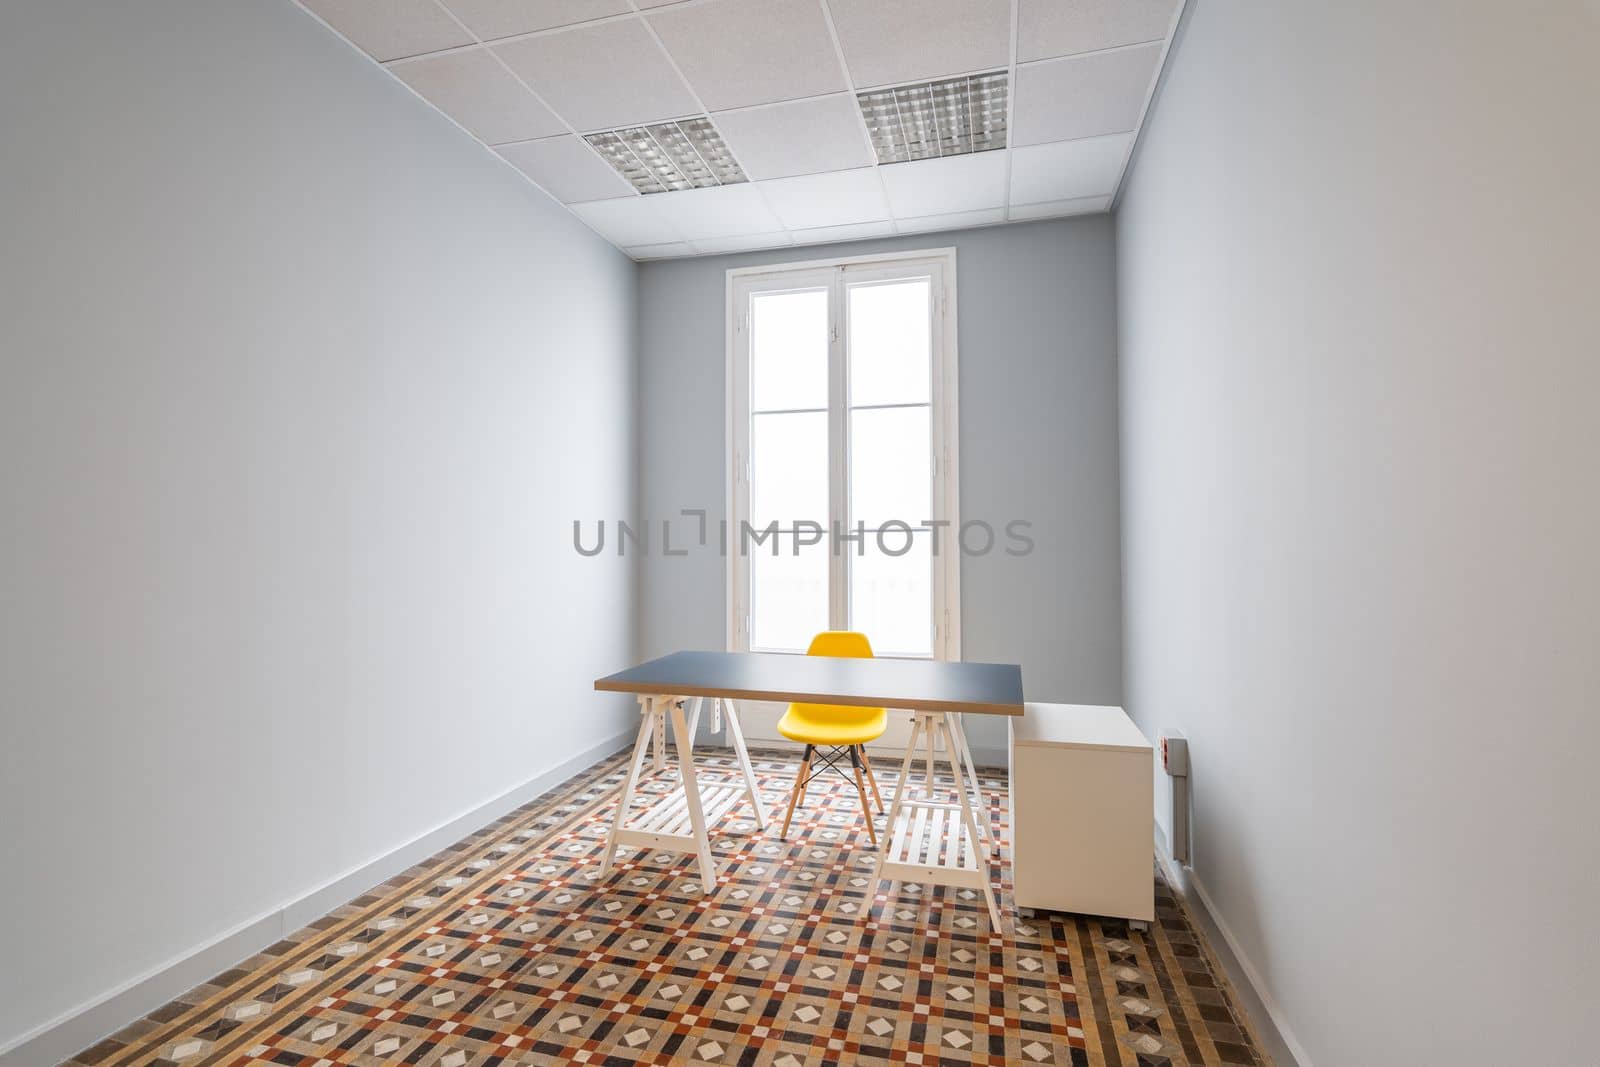 An empty room with gray smooth walls, doors leading to terrace. Floor is made of patterned marble tiles. There is table with gray top a yellow plastic chair with wooden legs in room